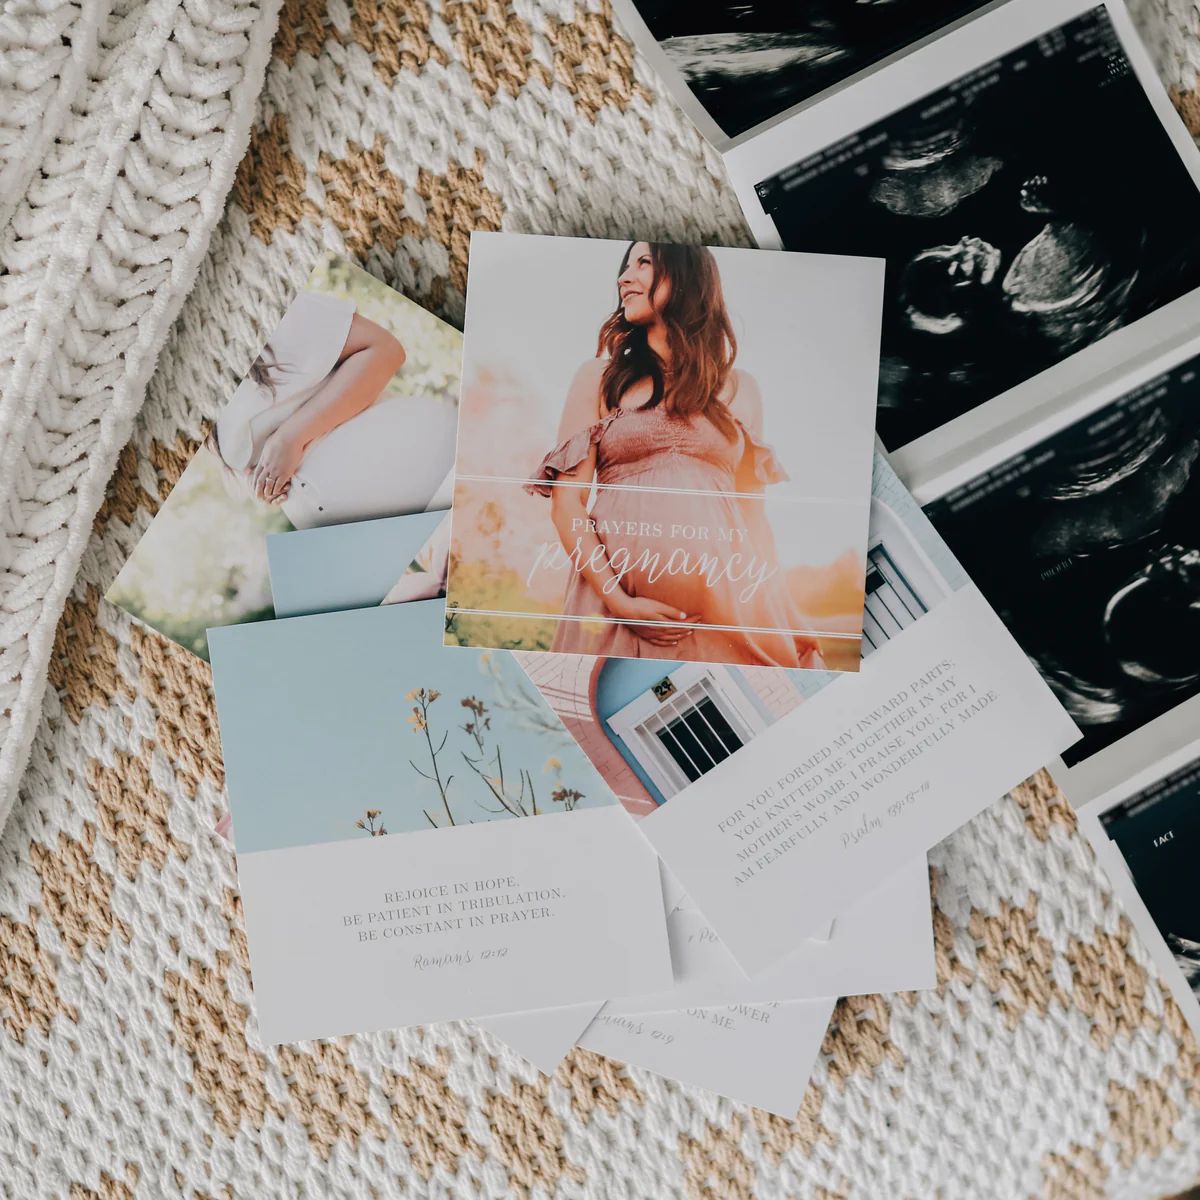 Prayers for My Pregnancy | The Daily Grace Co.